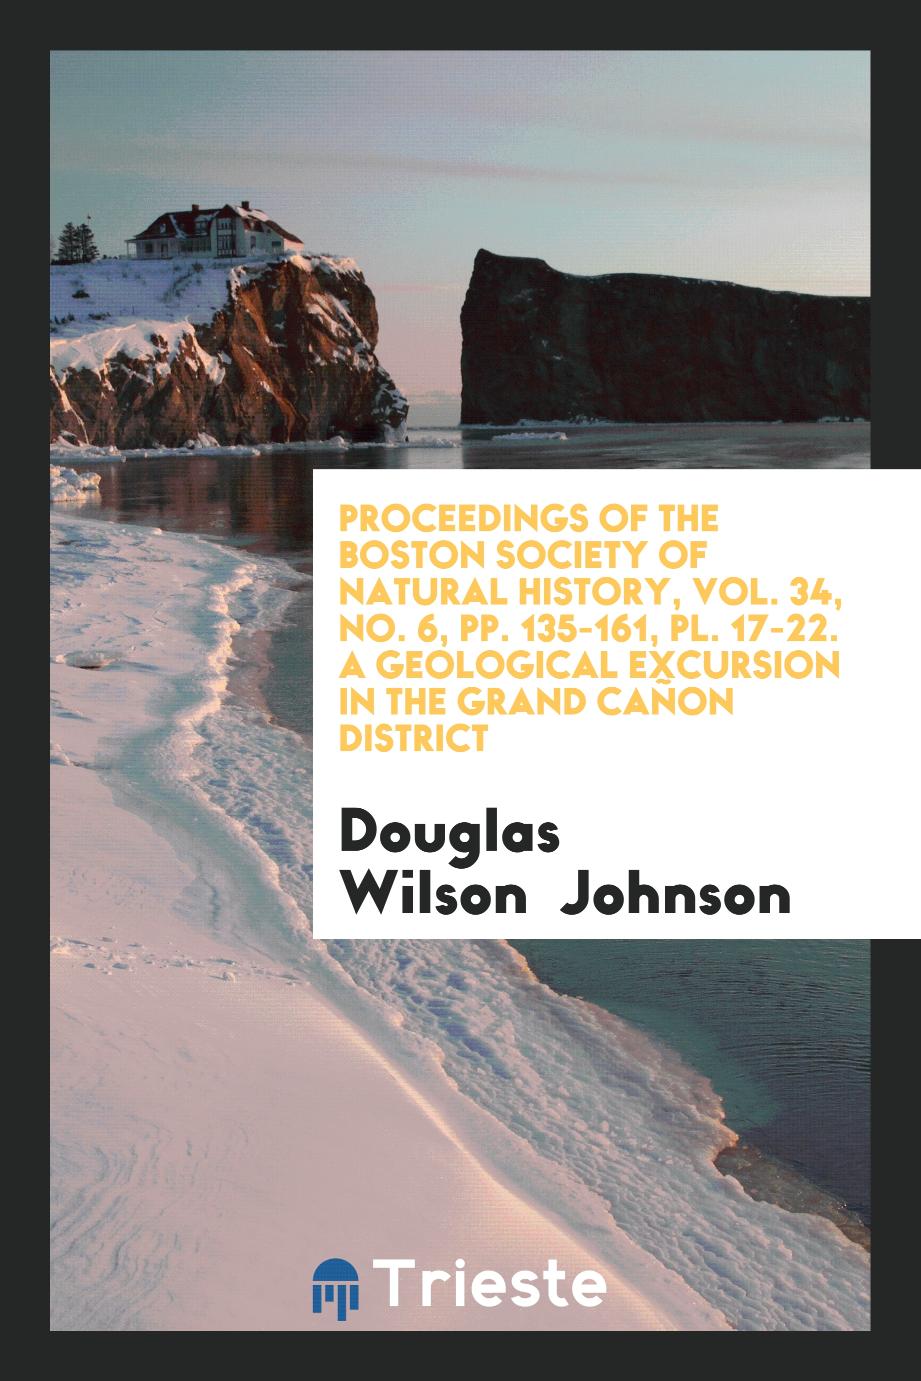 Proceedings of the Boston Society of Natural History, vol. 34, No. 6, pp. 135-161, pl. 17-22. A Geological Excursion in the Grand Cañon District